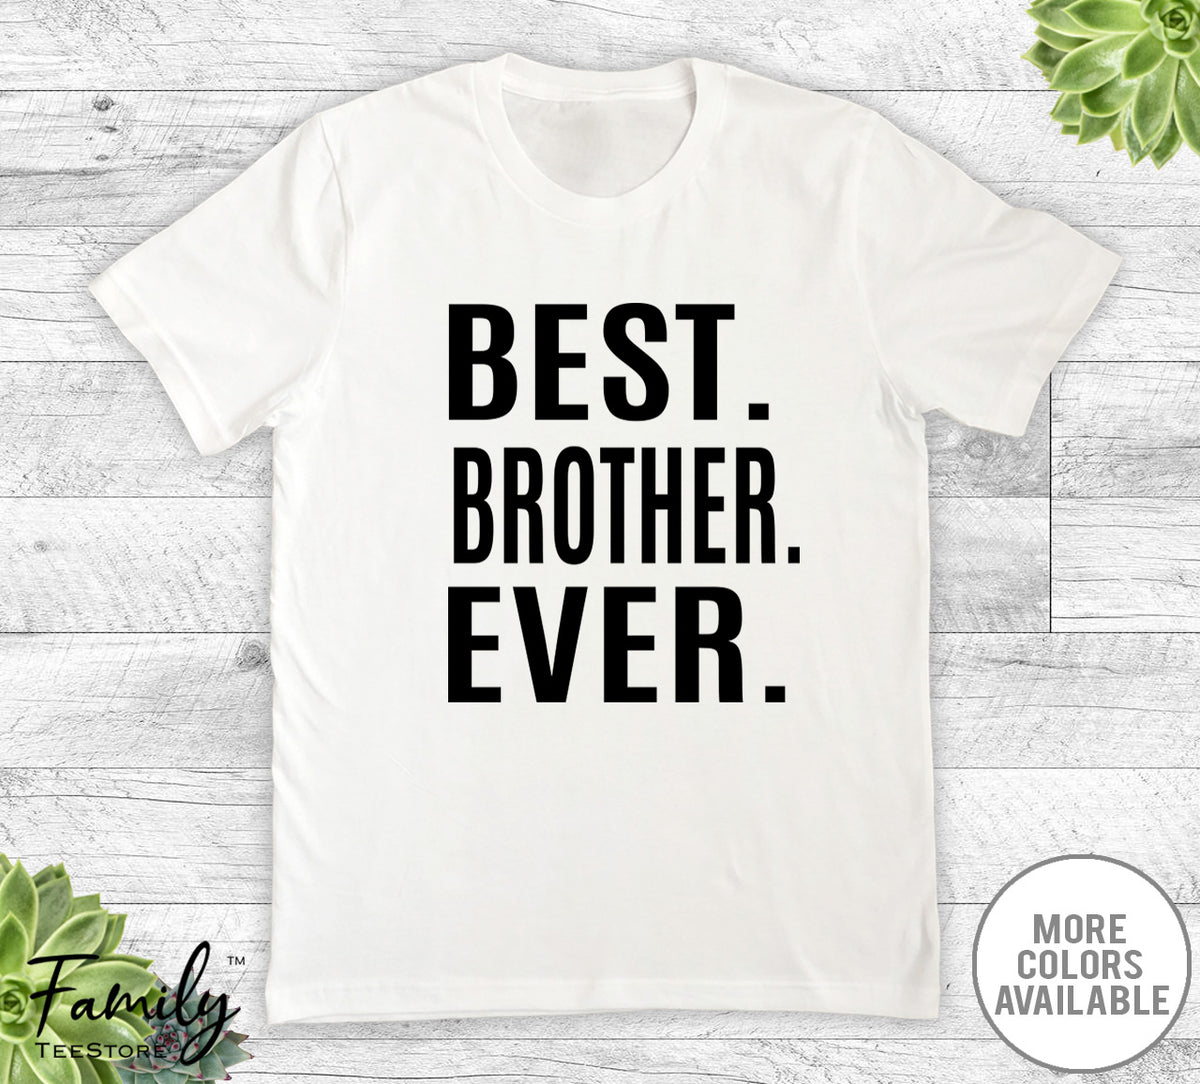 Best Brother Ever - Unisex T-shirt - Brother Shirt - Brother Gift - familyteeprints